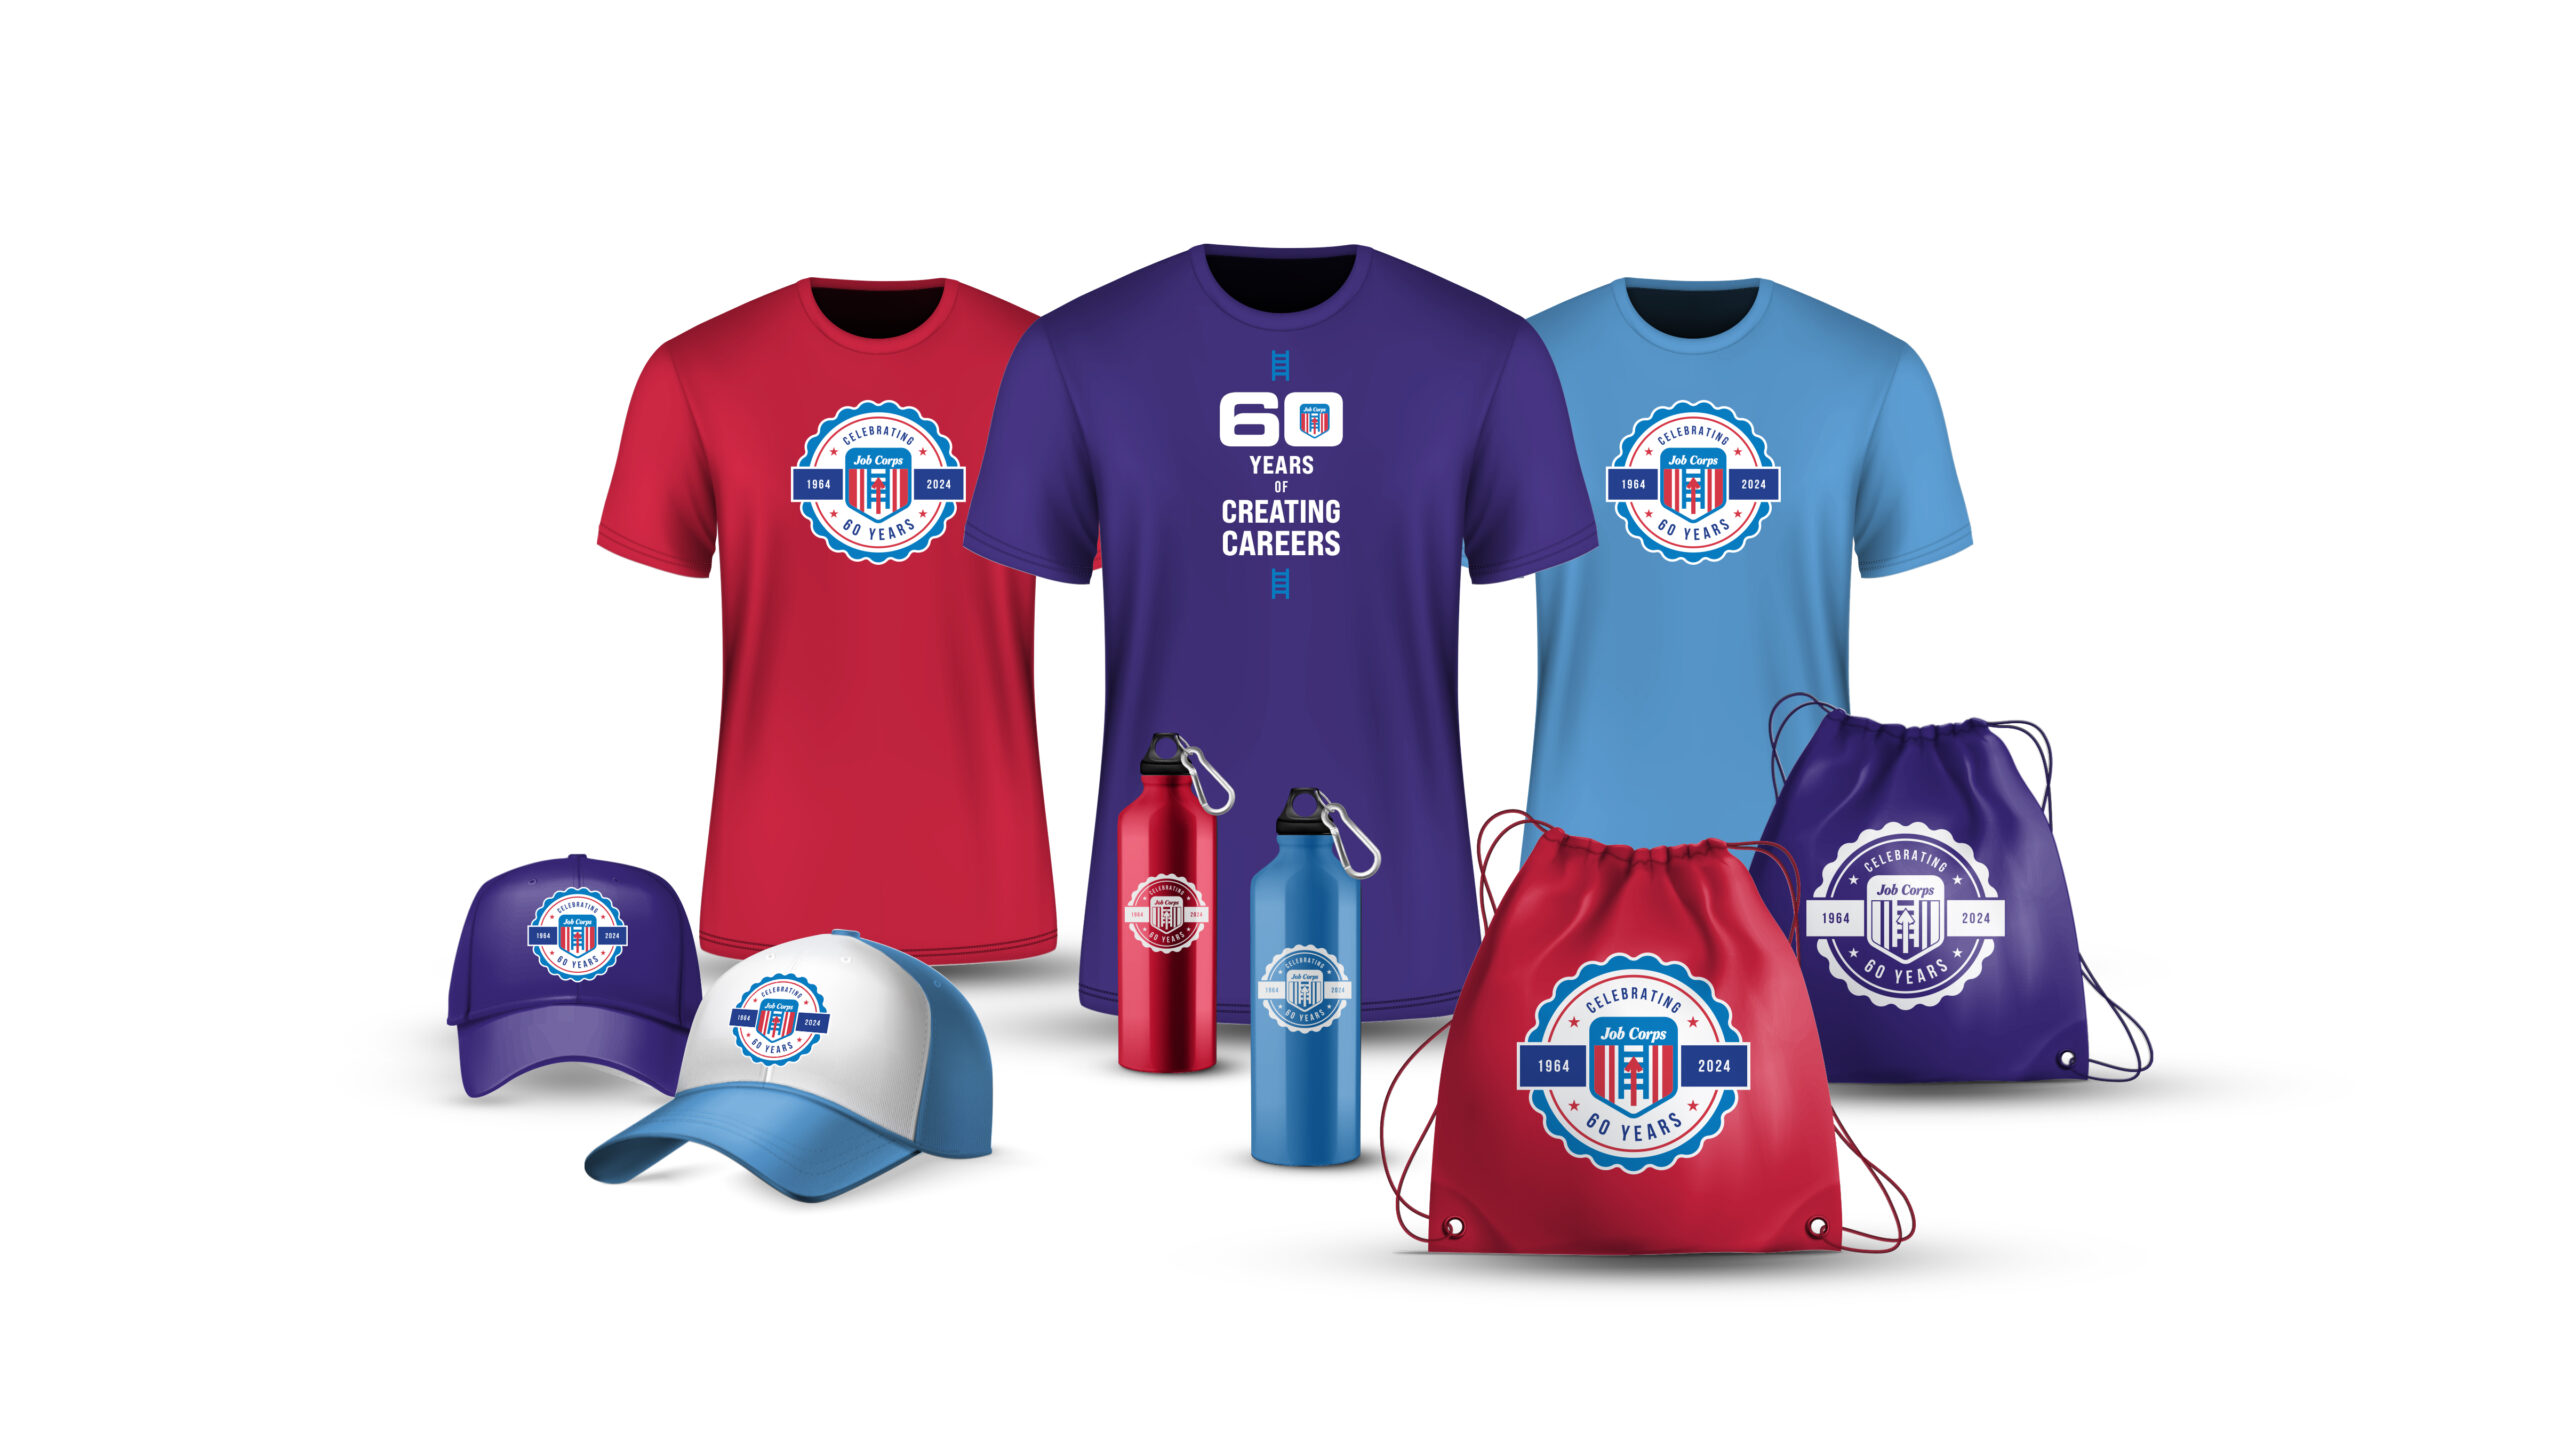 JC L1ab 60th Promotional Items